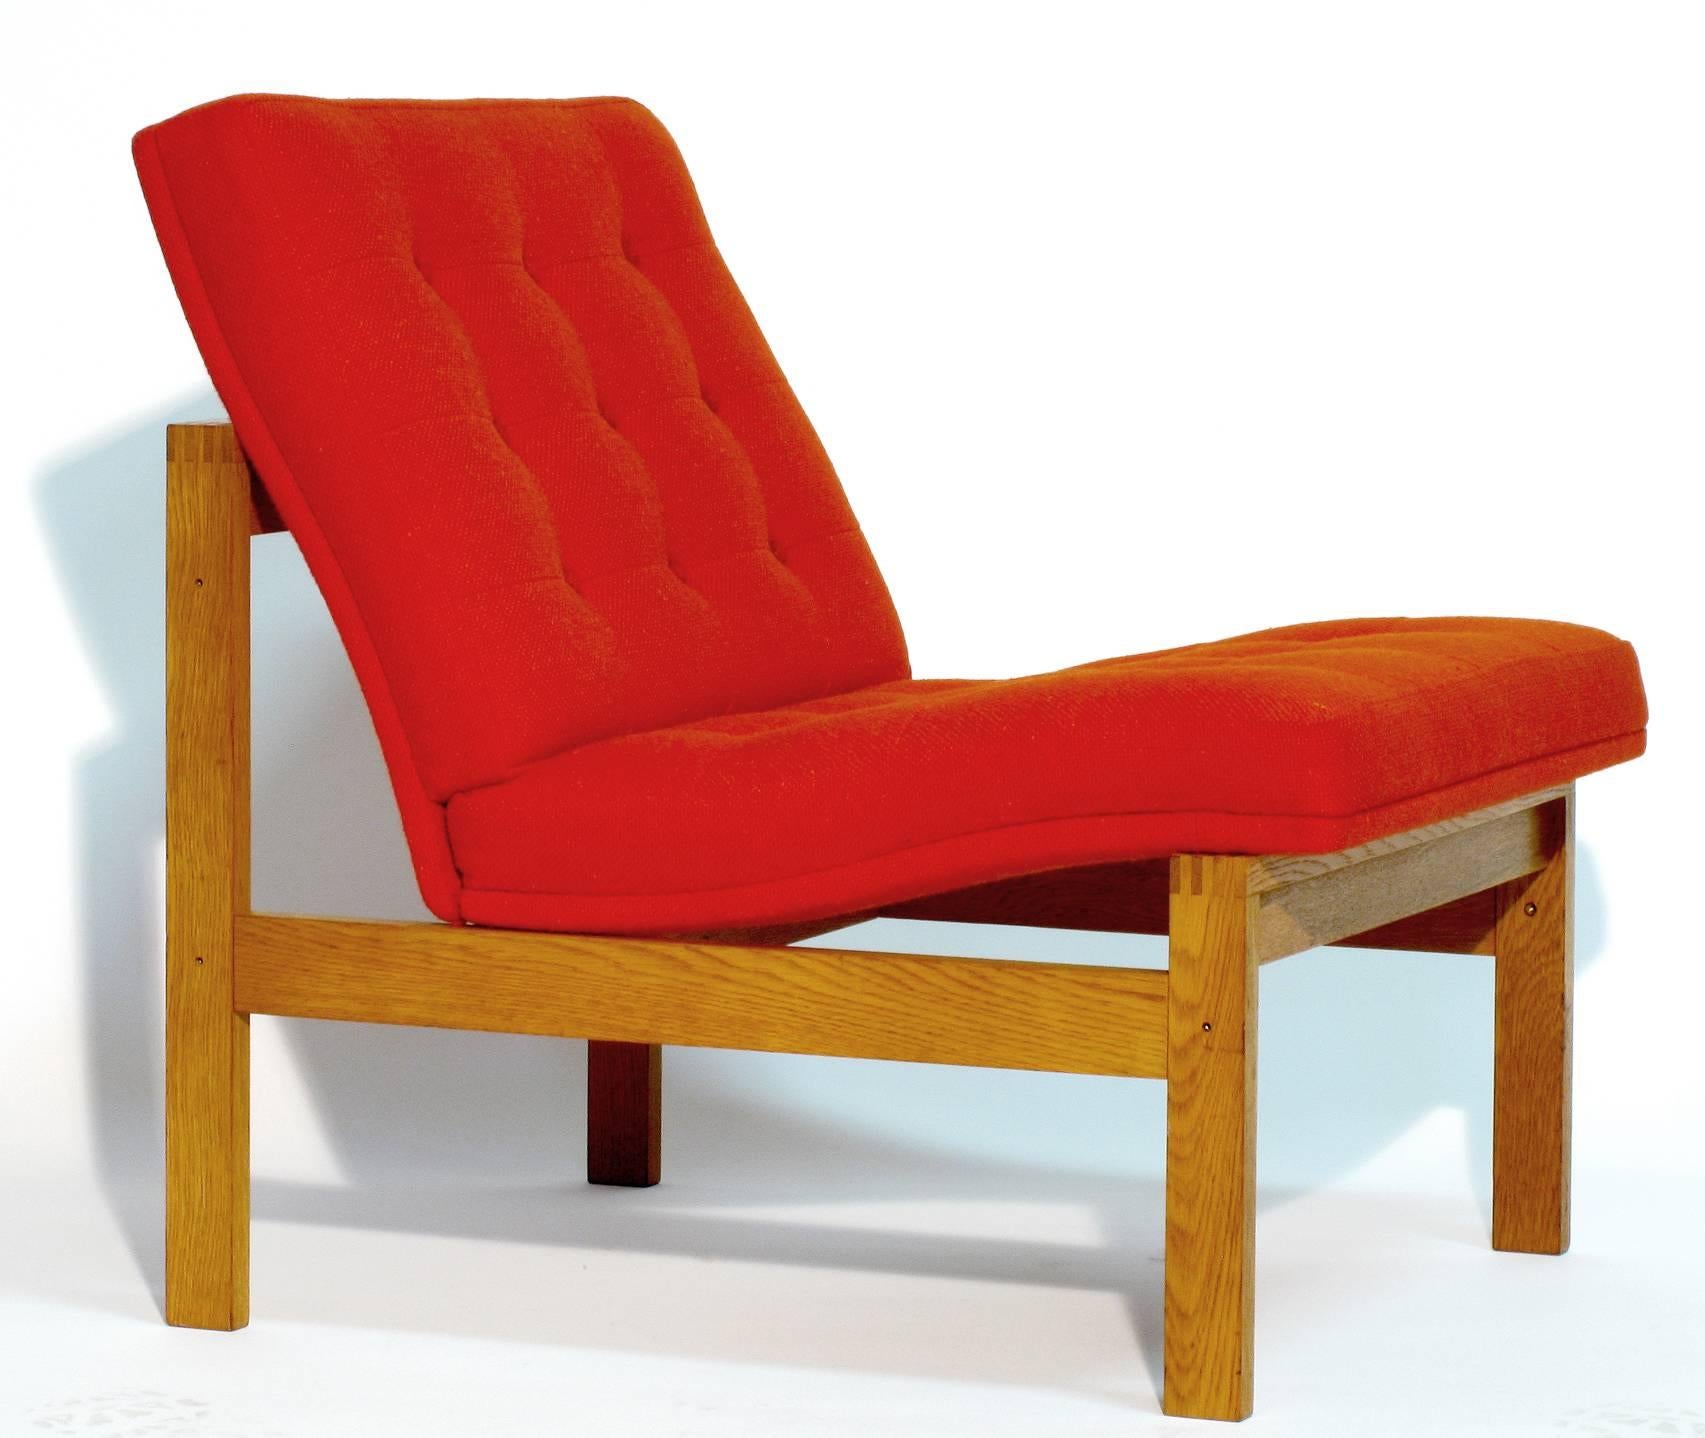 A pair of Danish modular easy chairs designed by Torben Lind and Ole Gjerløv-Knudsen, for France and Son. Oakwood with original buttoned orange wool tweed upholstery in excellent condition. Seat cushions were removed from the frame and